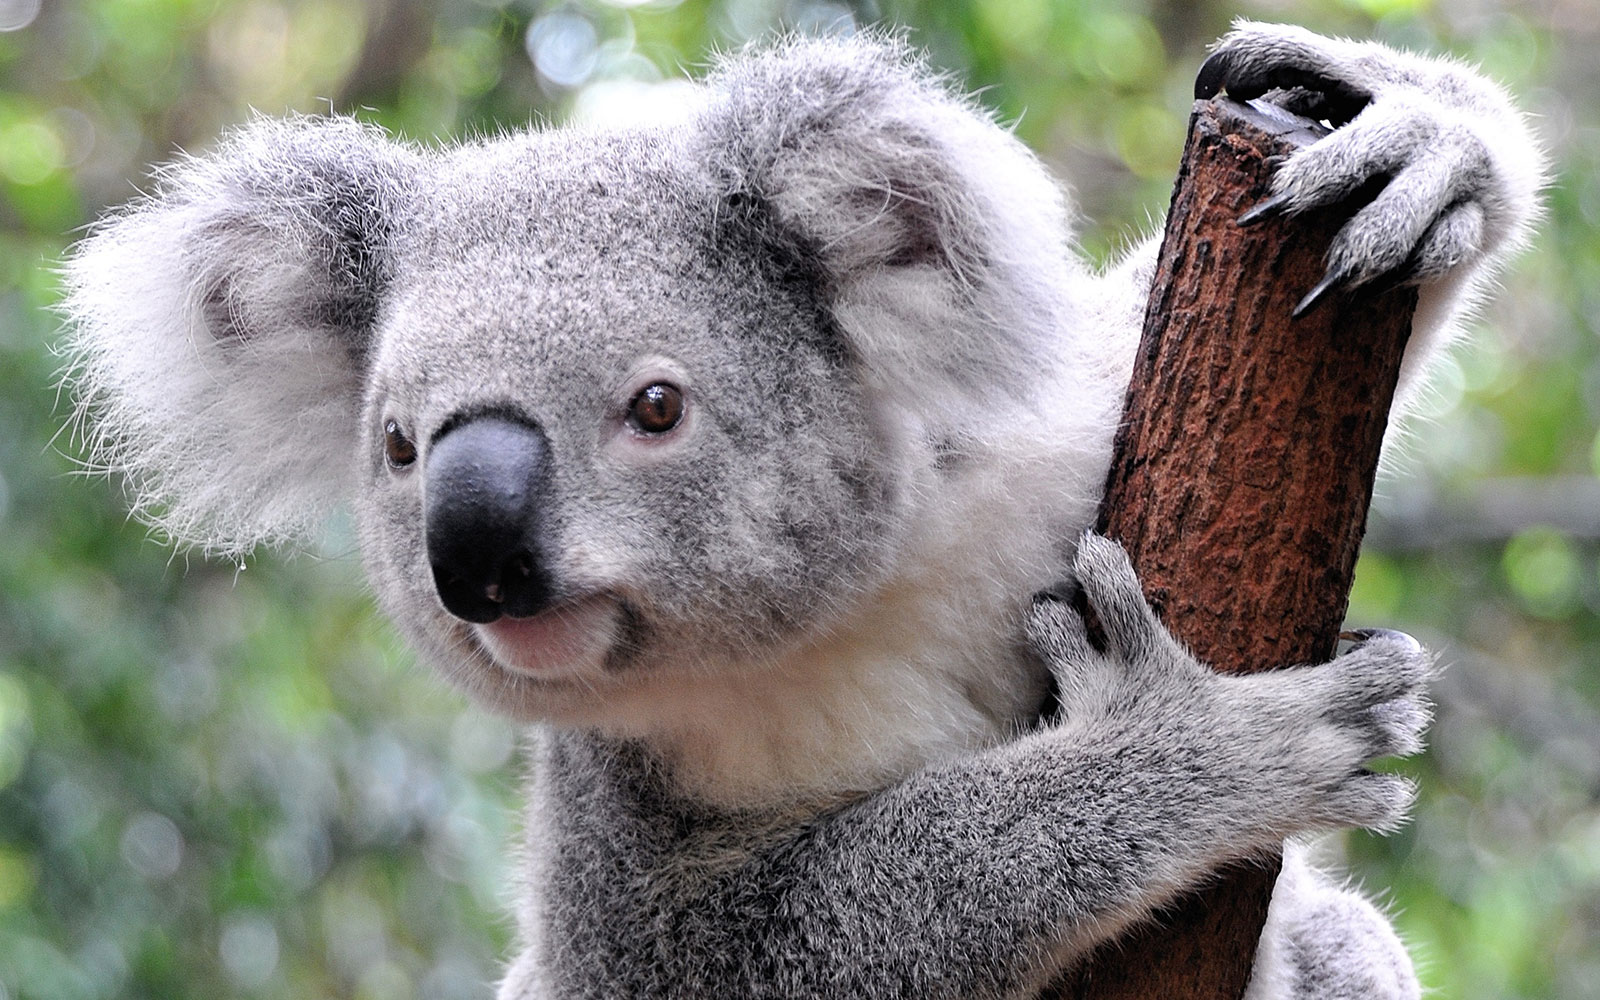 Answer These 22 Questions to Find Out If You Have Enough General Knowledge Koala